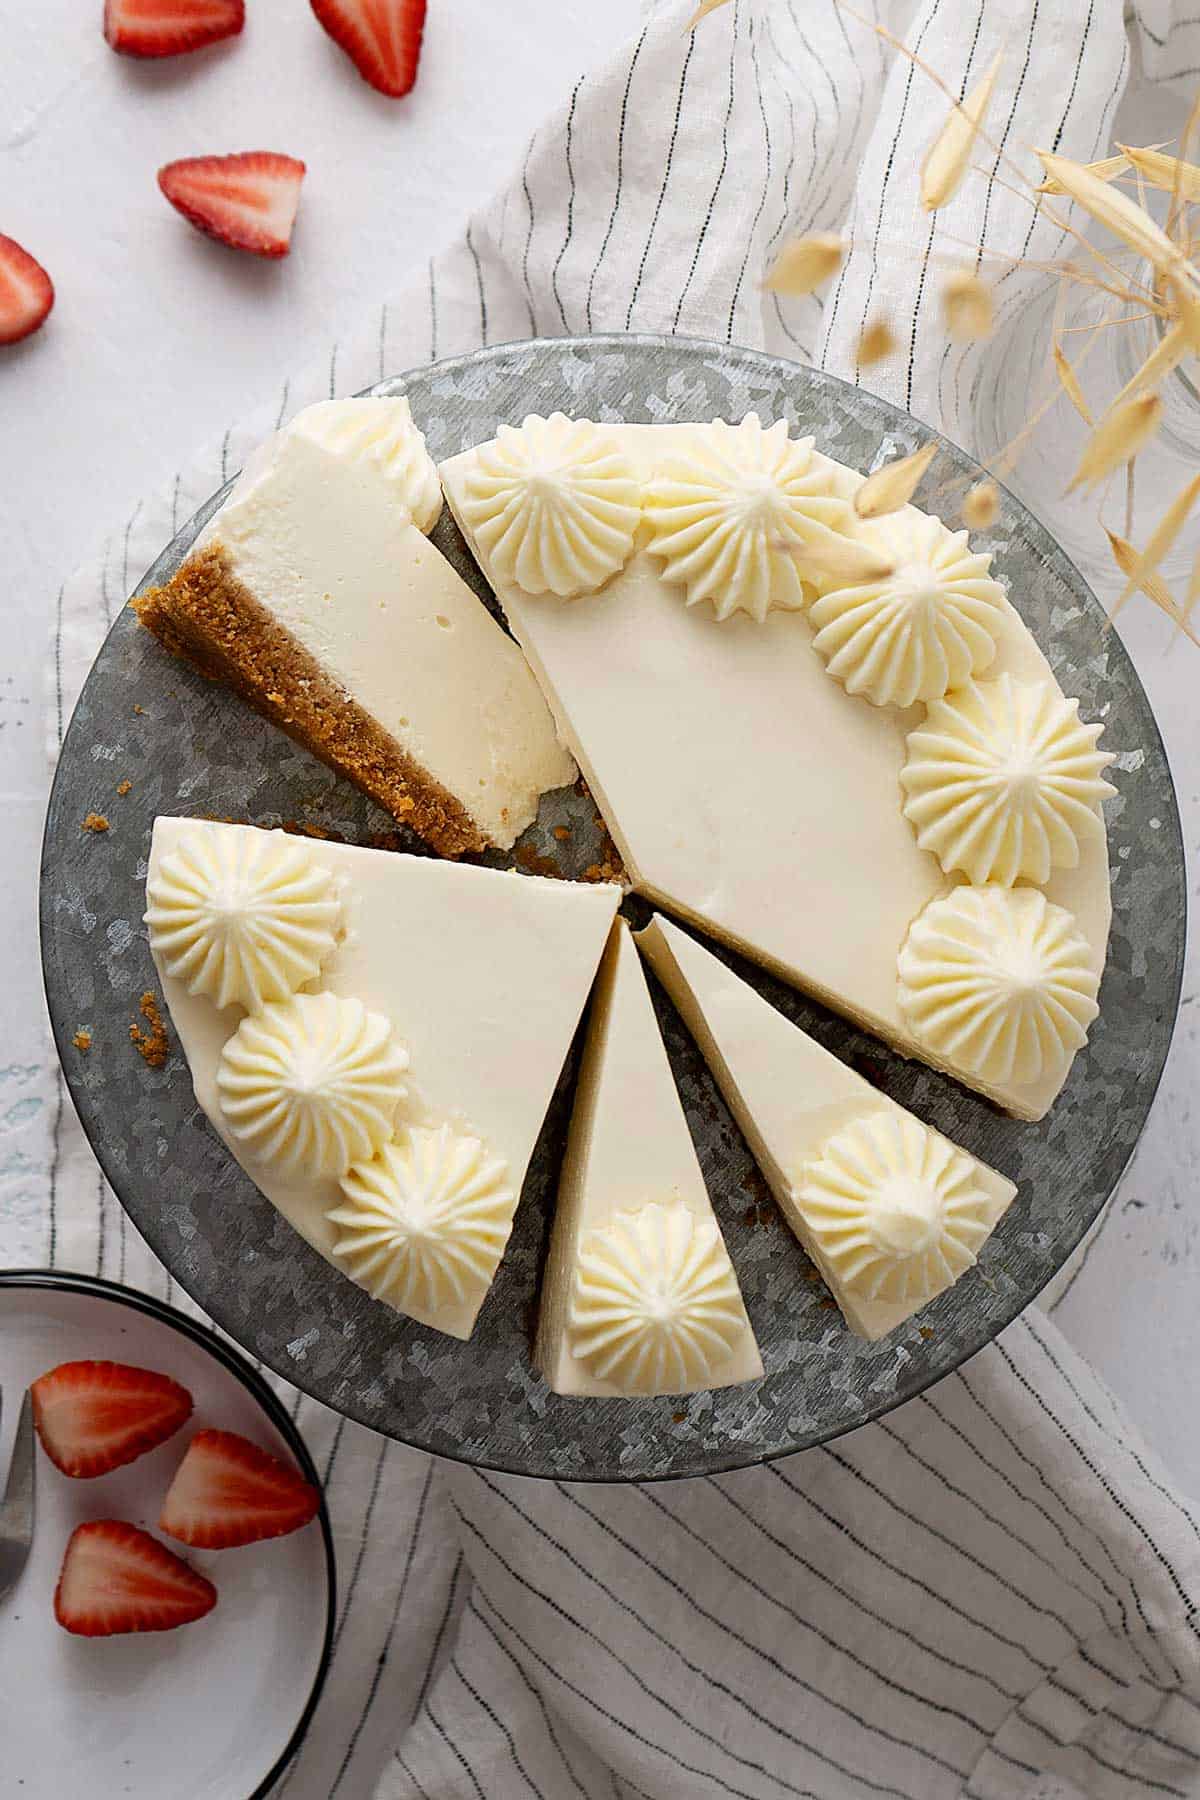 How to Remove Cheesecake from Springform Pan - Life Love and Sugar